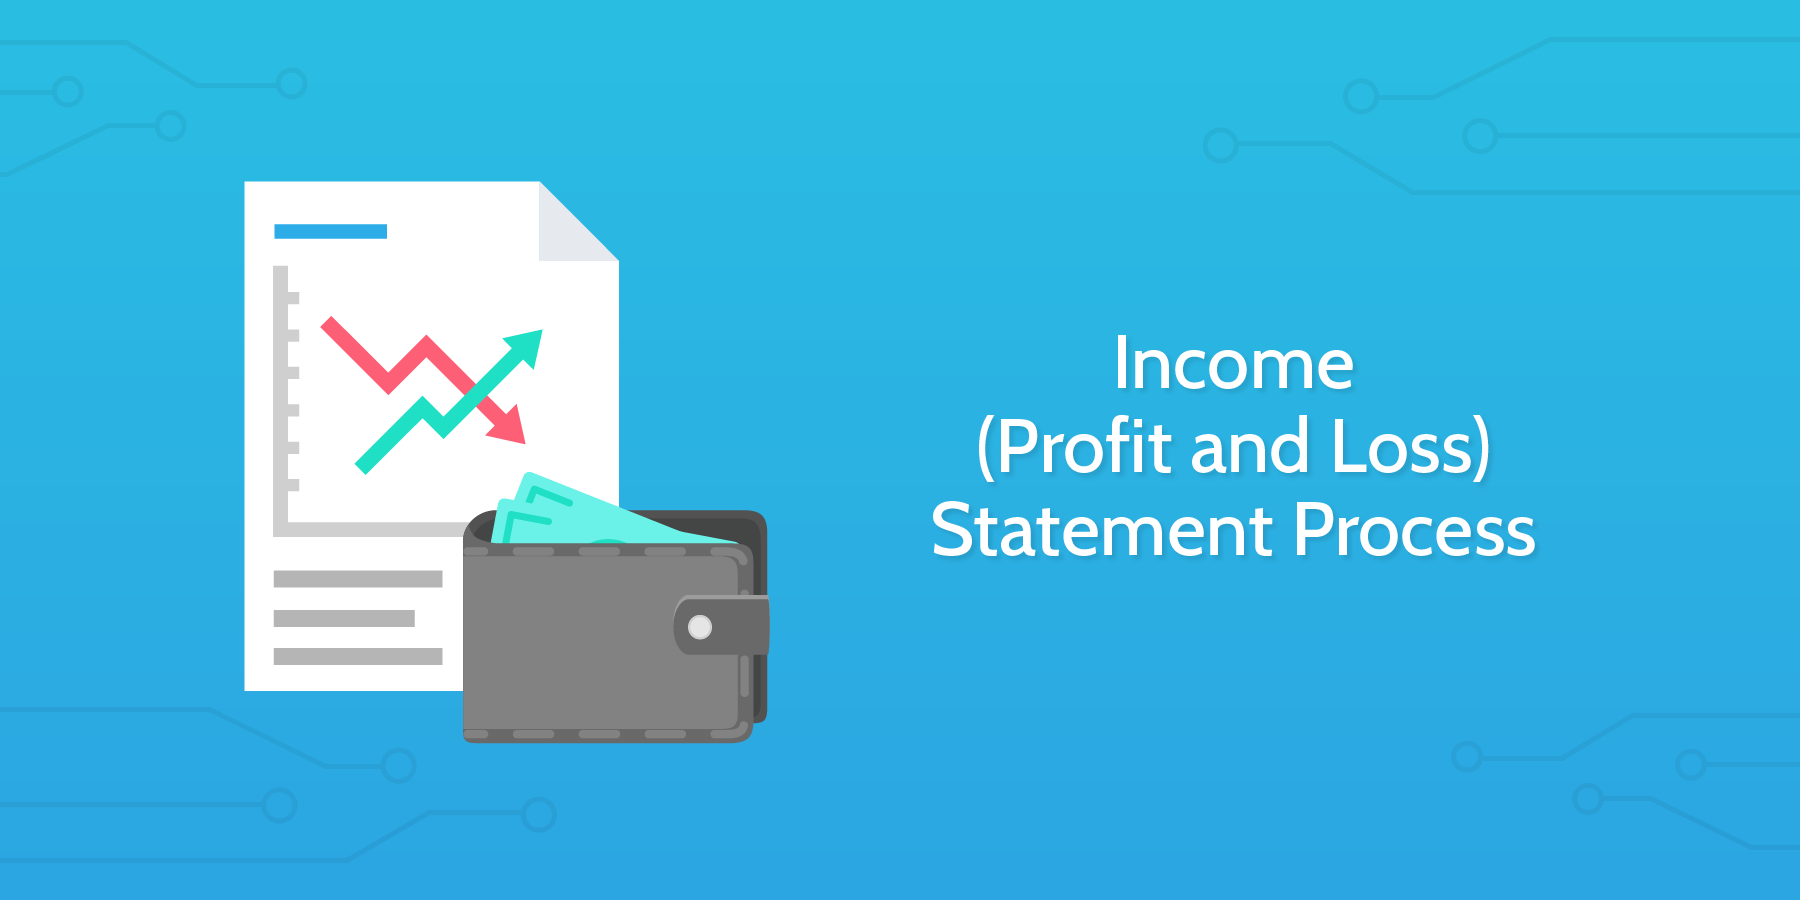 income-profit-and-loss-statement-process